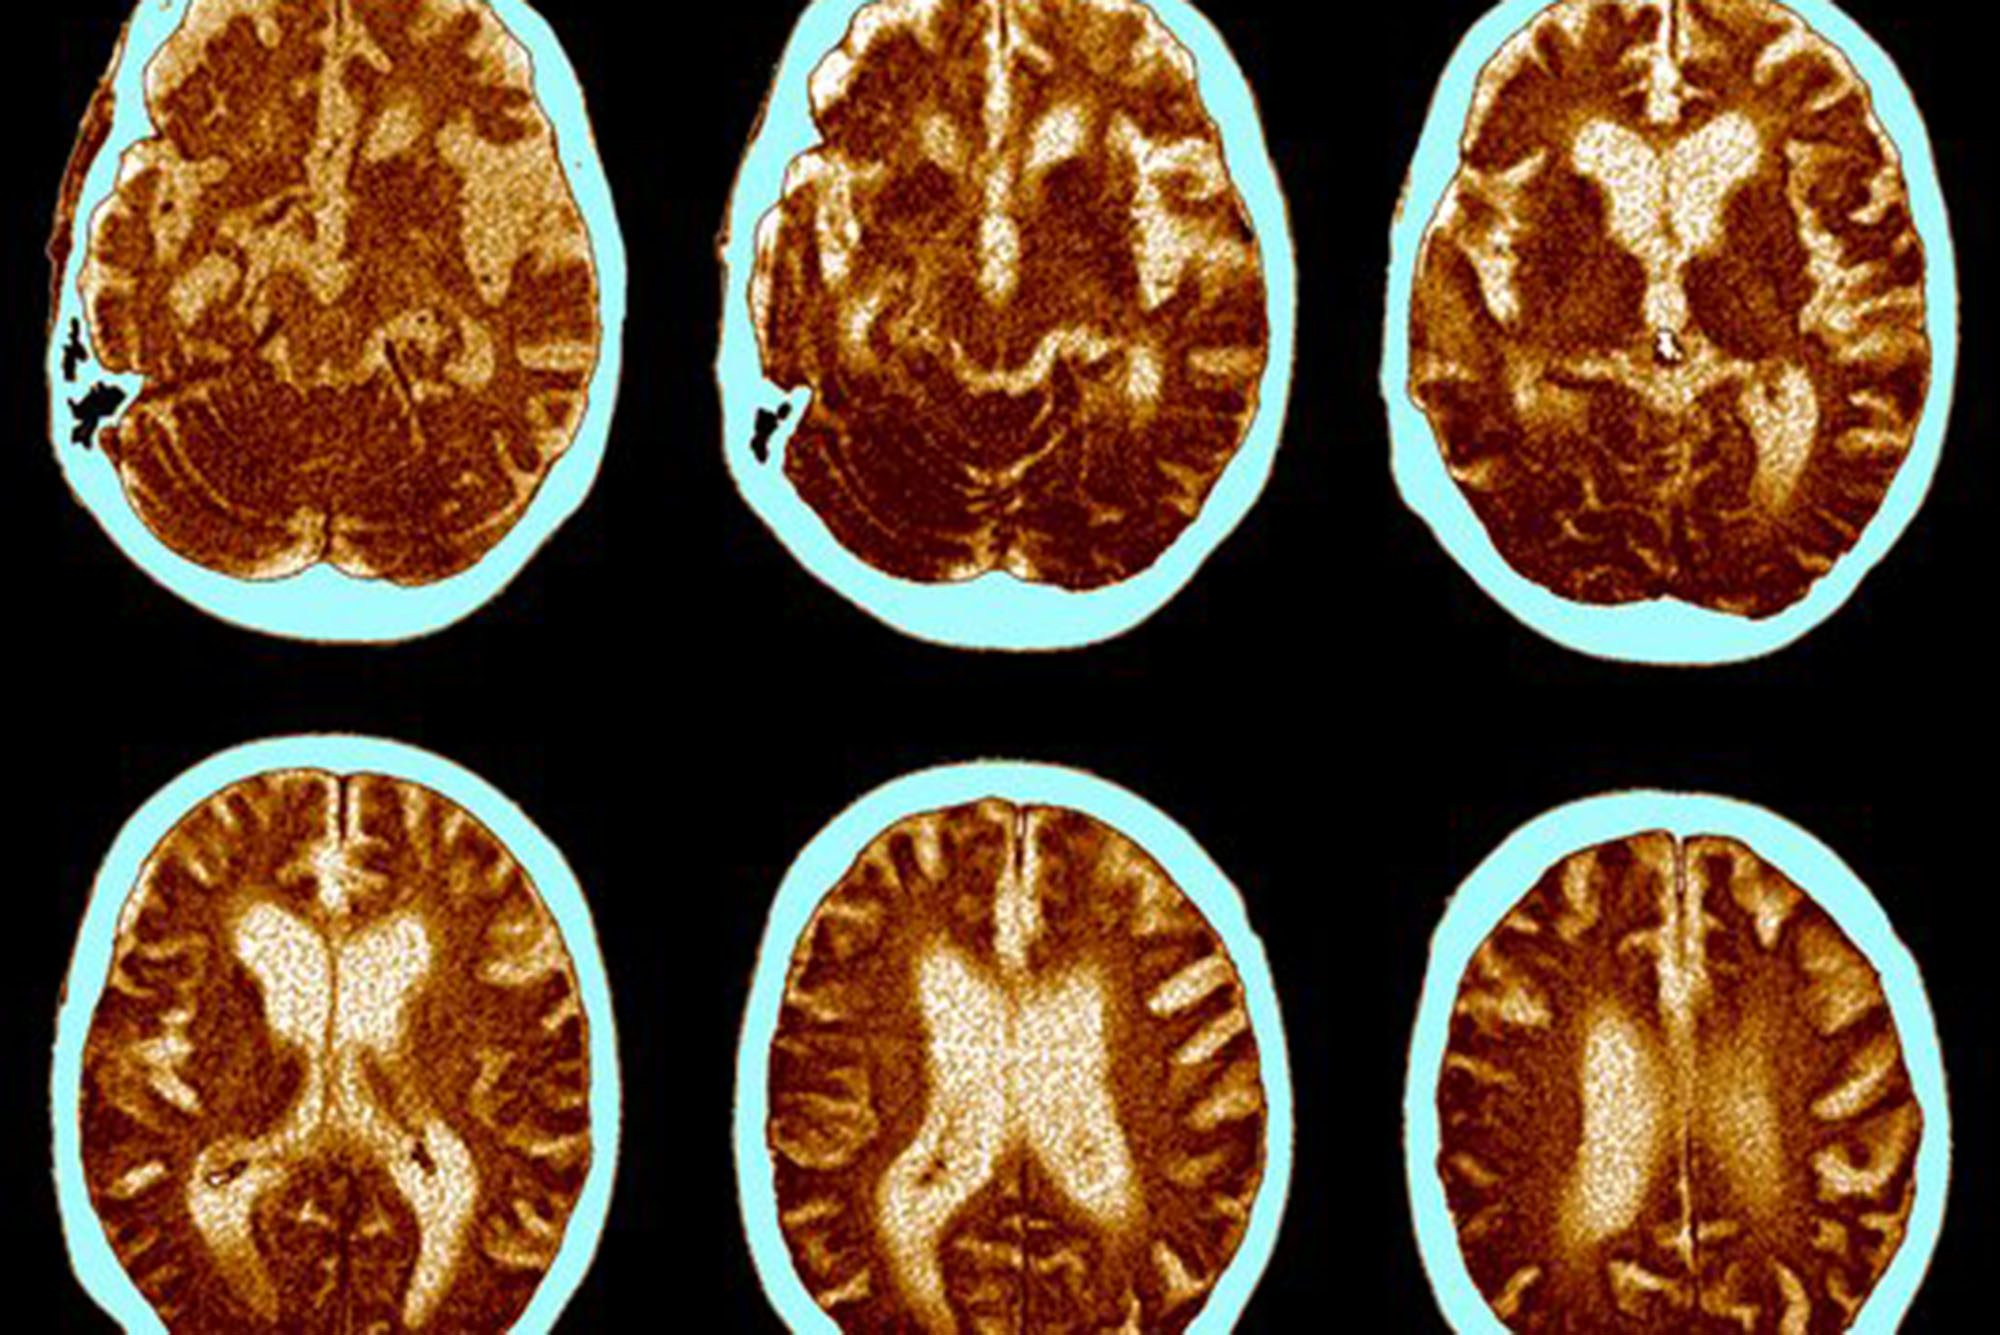 MRI images of the brain